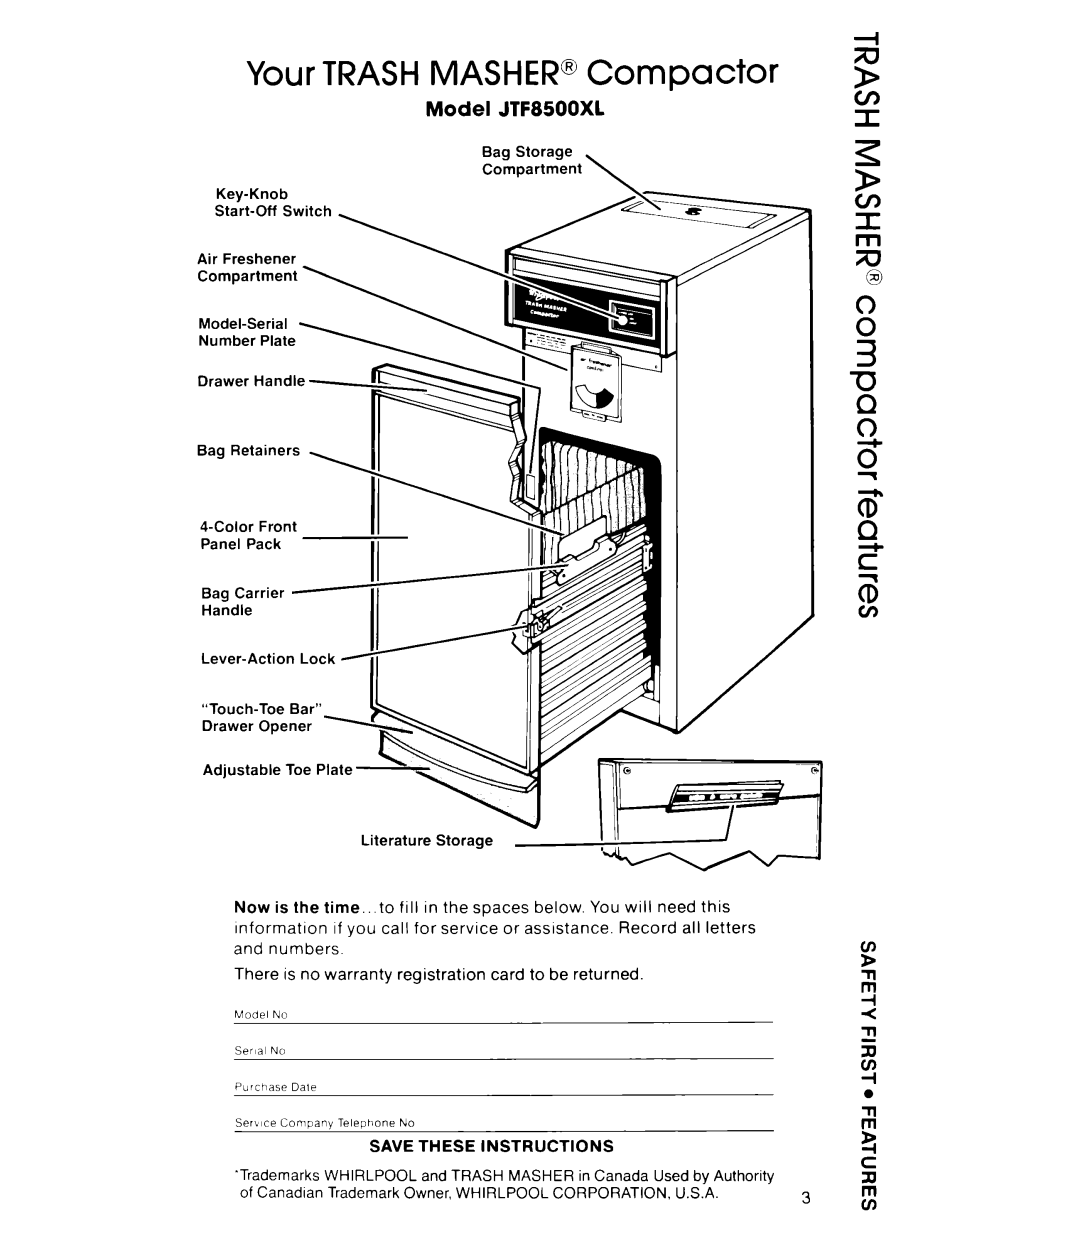 Whirlpool 403, TRASH MASHER, Trash Compactor manual Your TRASHMASHER@Compactor, Model JTF8500XL, Save These Instructions 